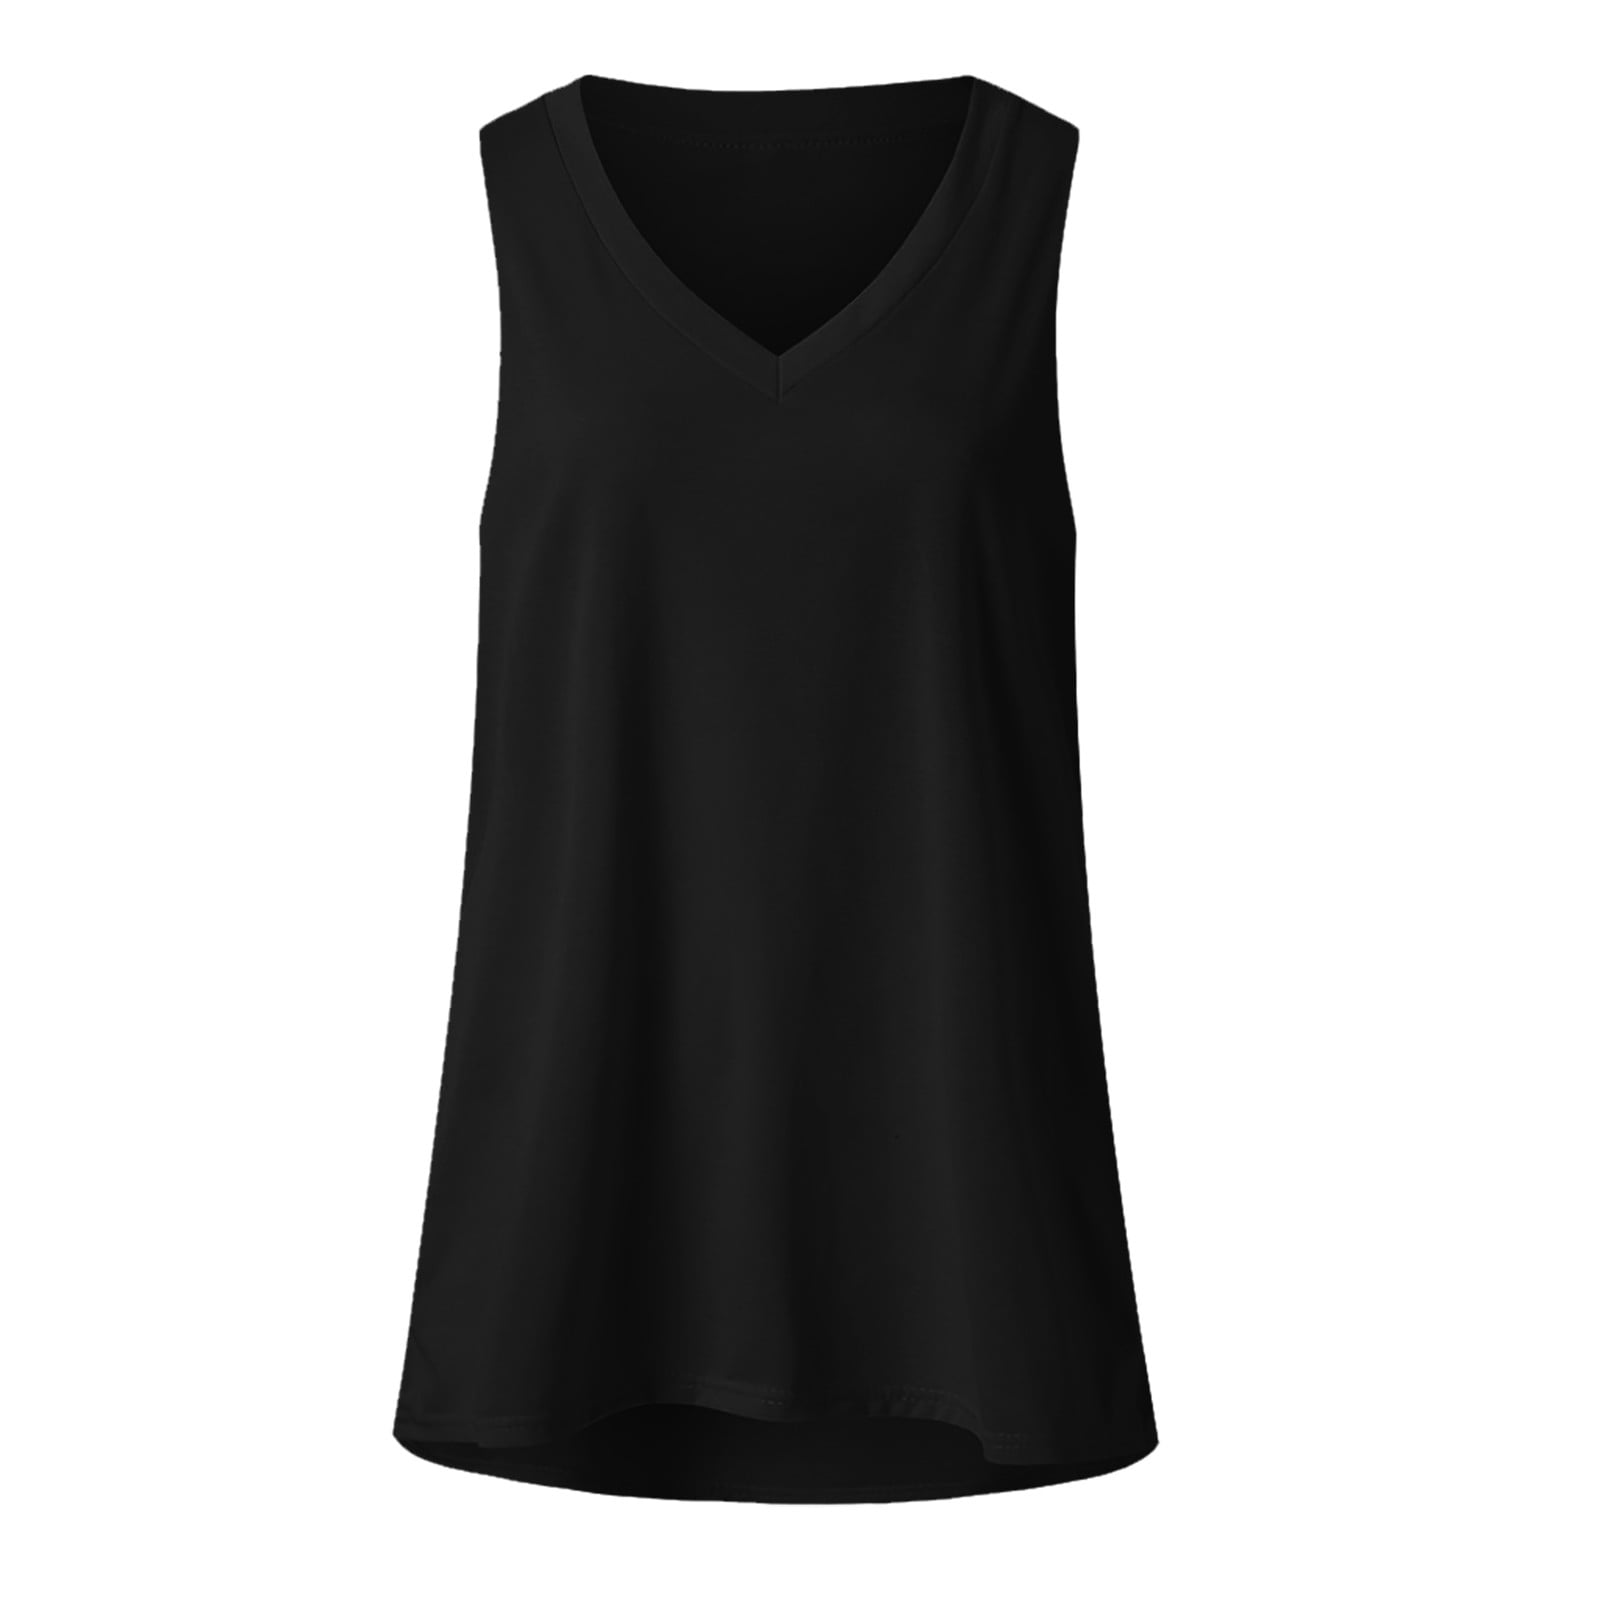 Viikei Tank Top for Women Sleeveless Tops Plus Size Casual Solid V-Neck ...